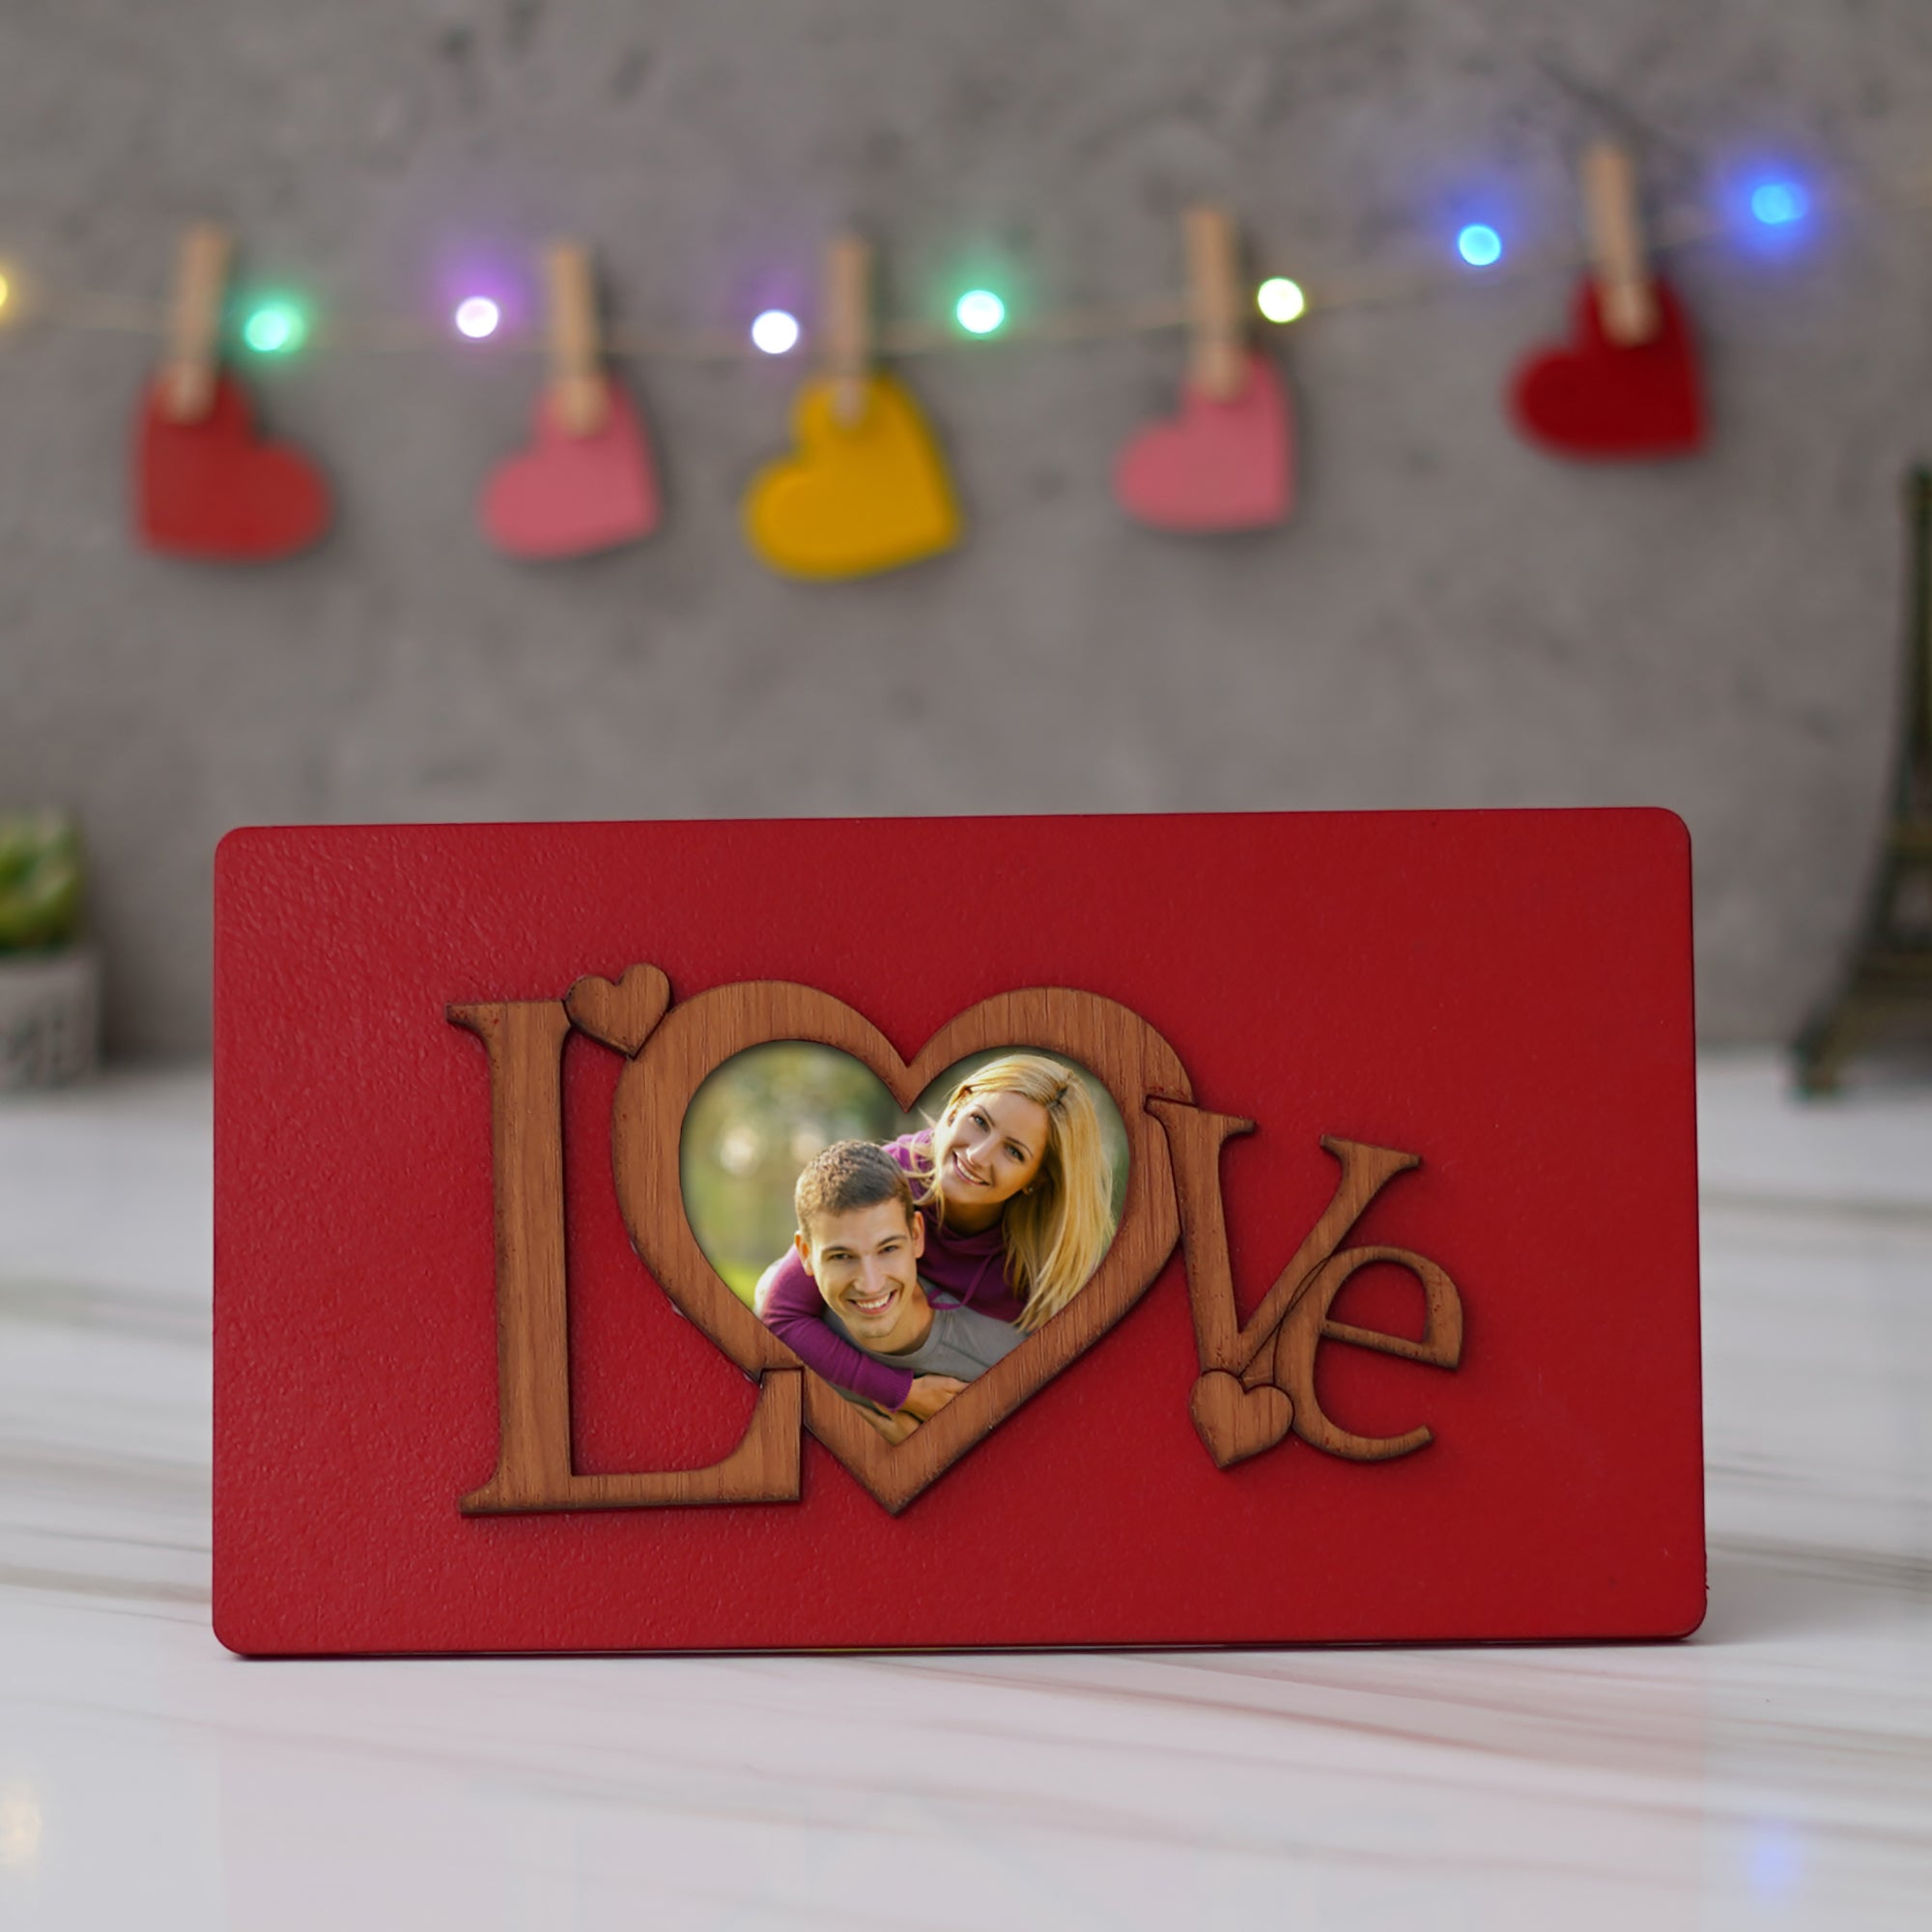 Valentine Combo of "Love" Wooden Photo Frame With Red Stand, Bride Kissing Groom Romantic Polyresin Decorative Showpiece 1